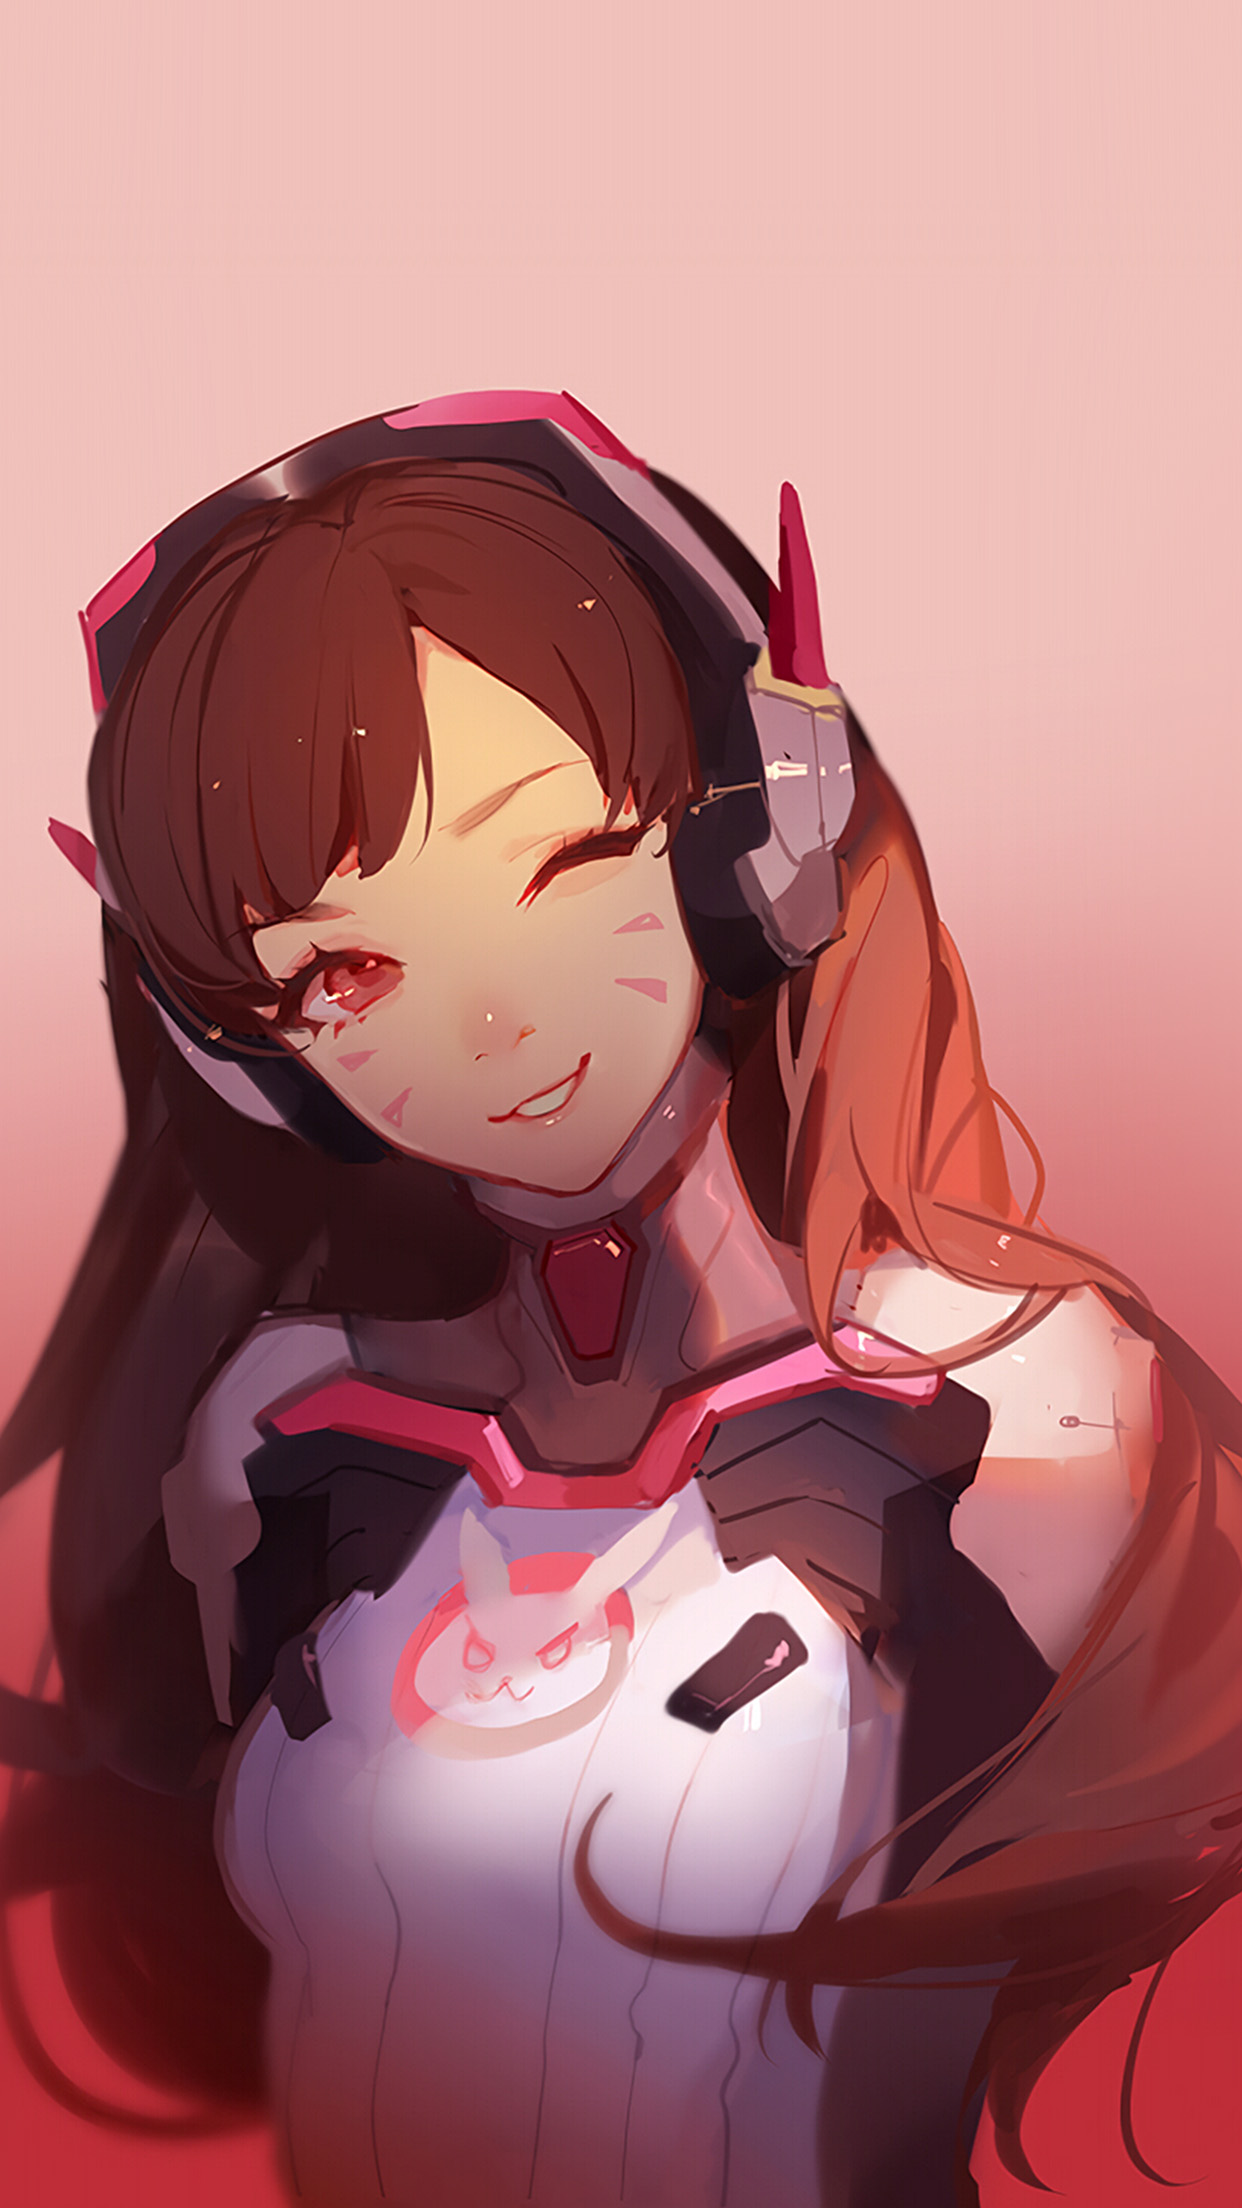 Dva Overwatch Cute Anime Game Art Illustration Red Android wallpaper